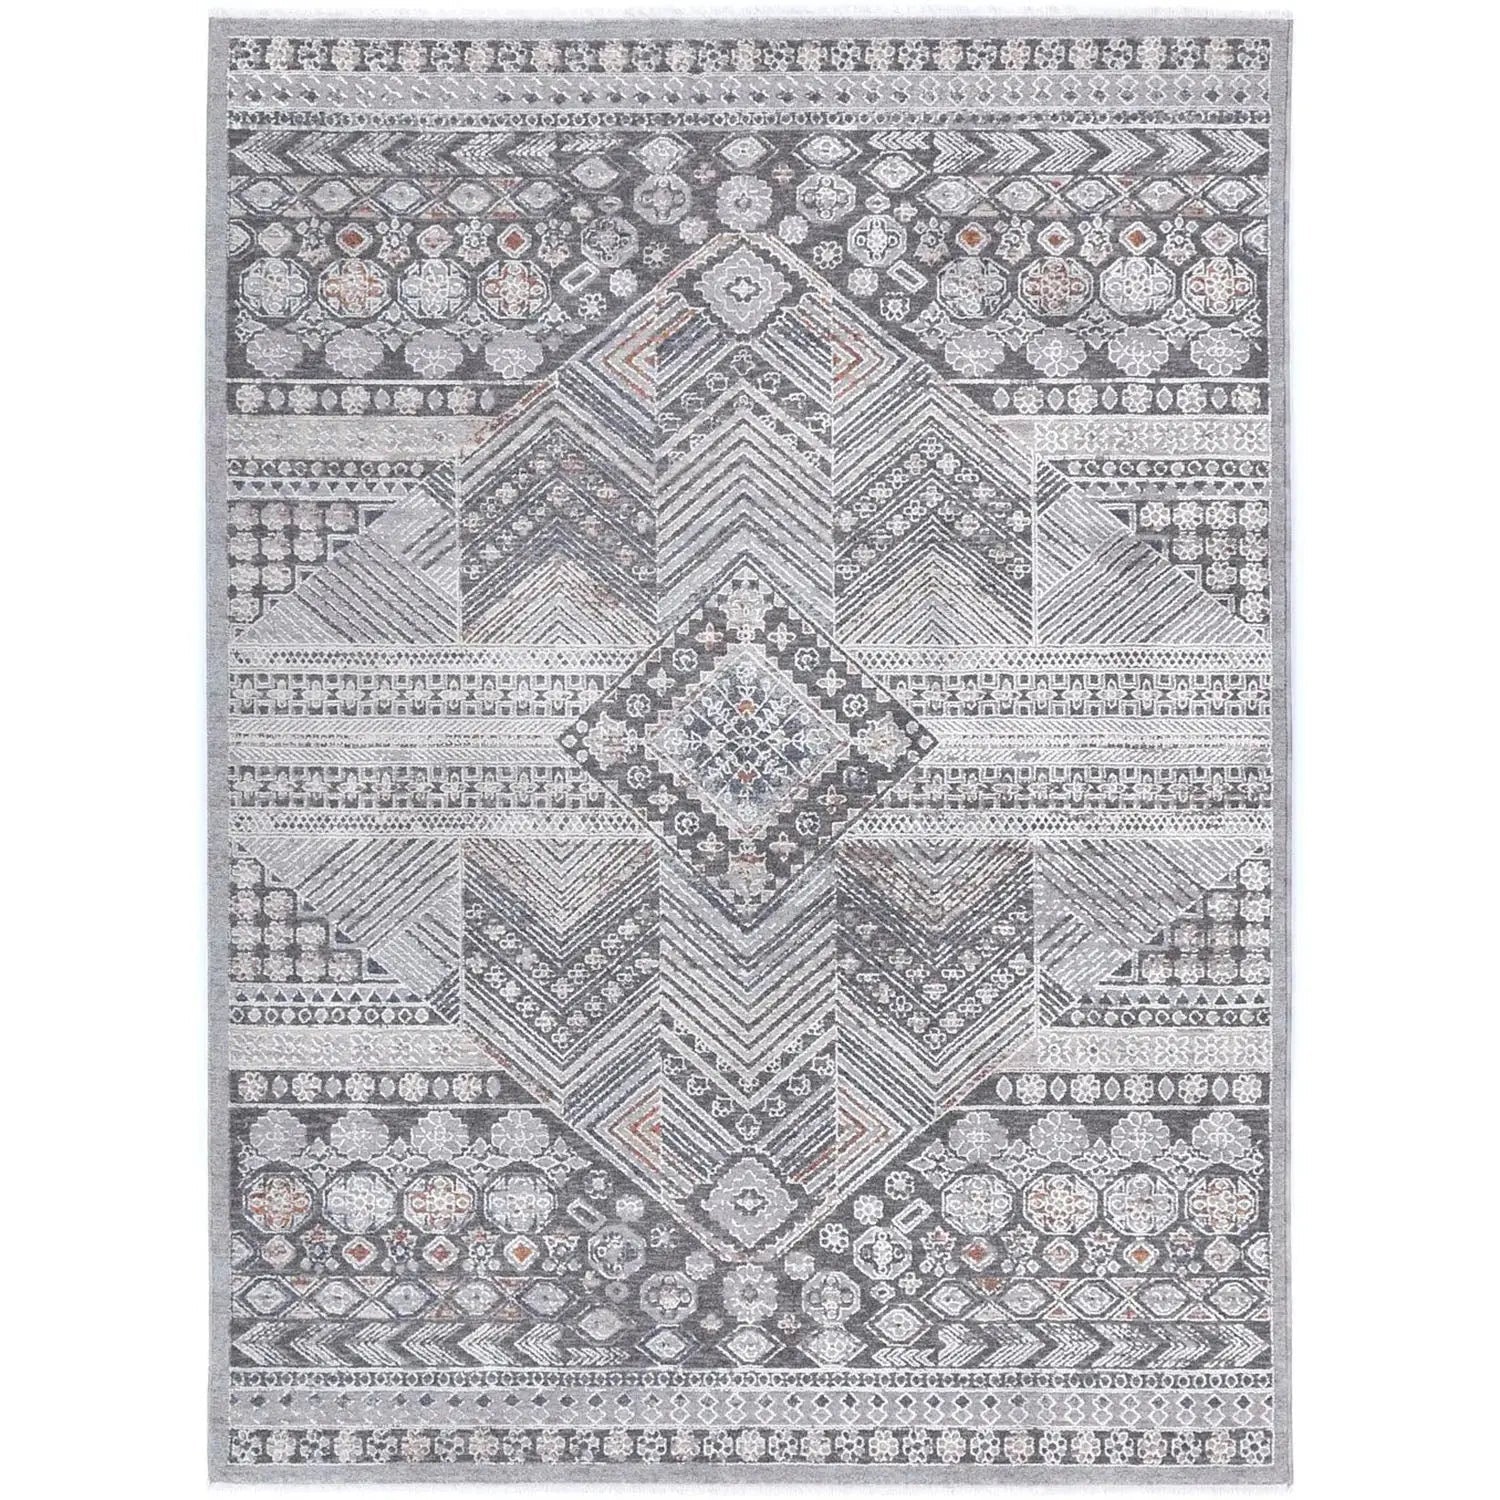 Zagros Aztec Motif Rug in Silver - Rugs - Rugs a Million